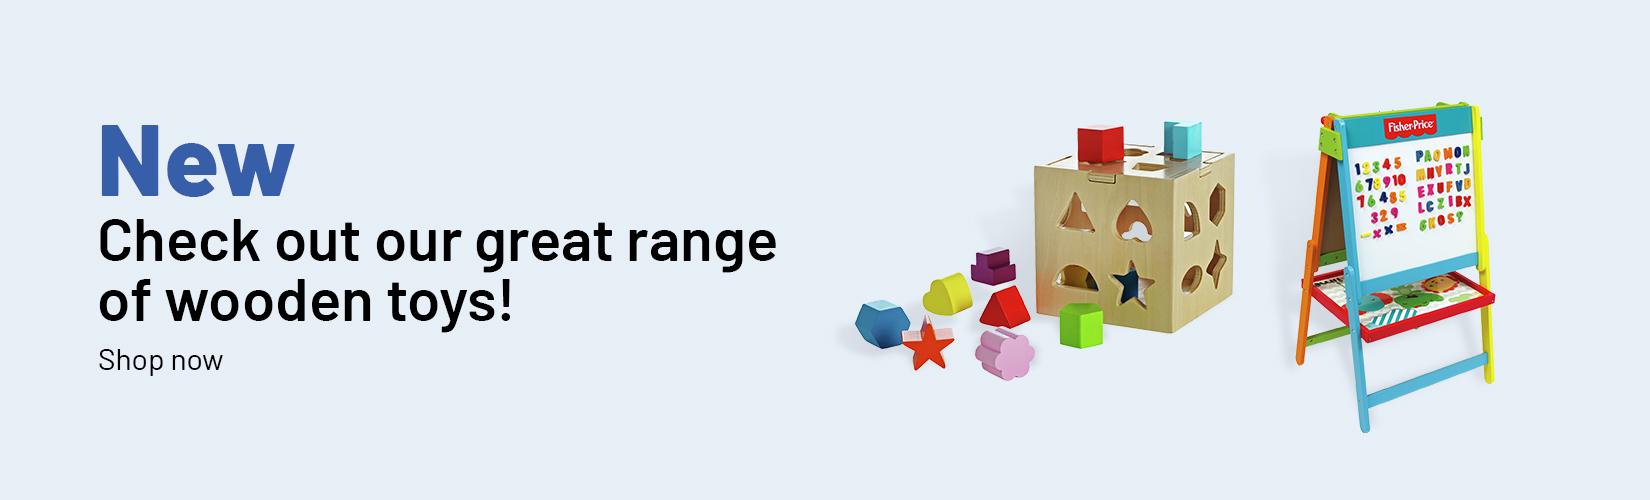 Check out our great range of wooden toys!